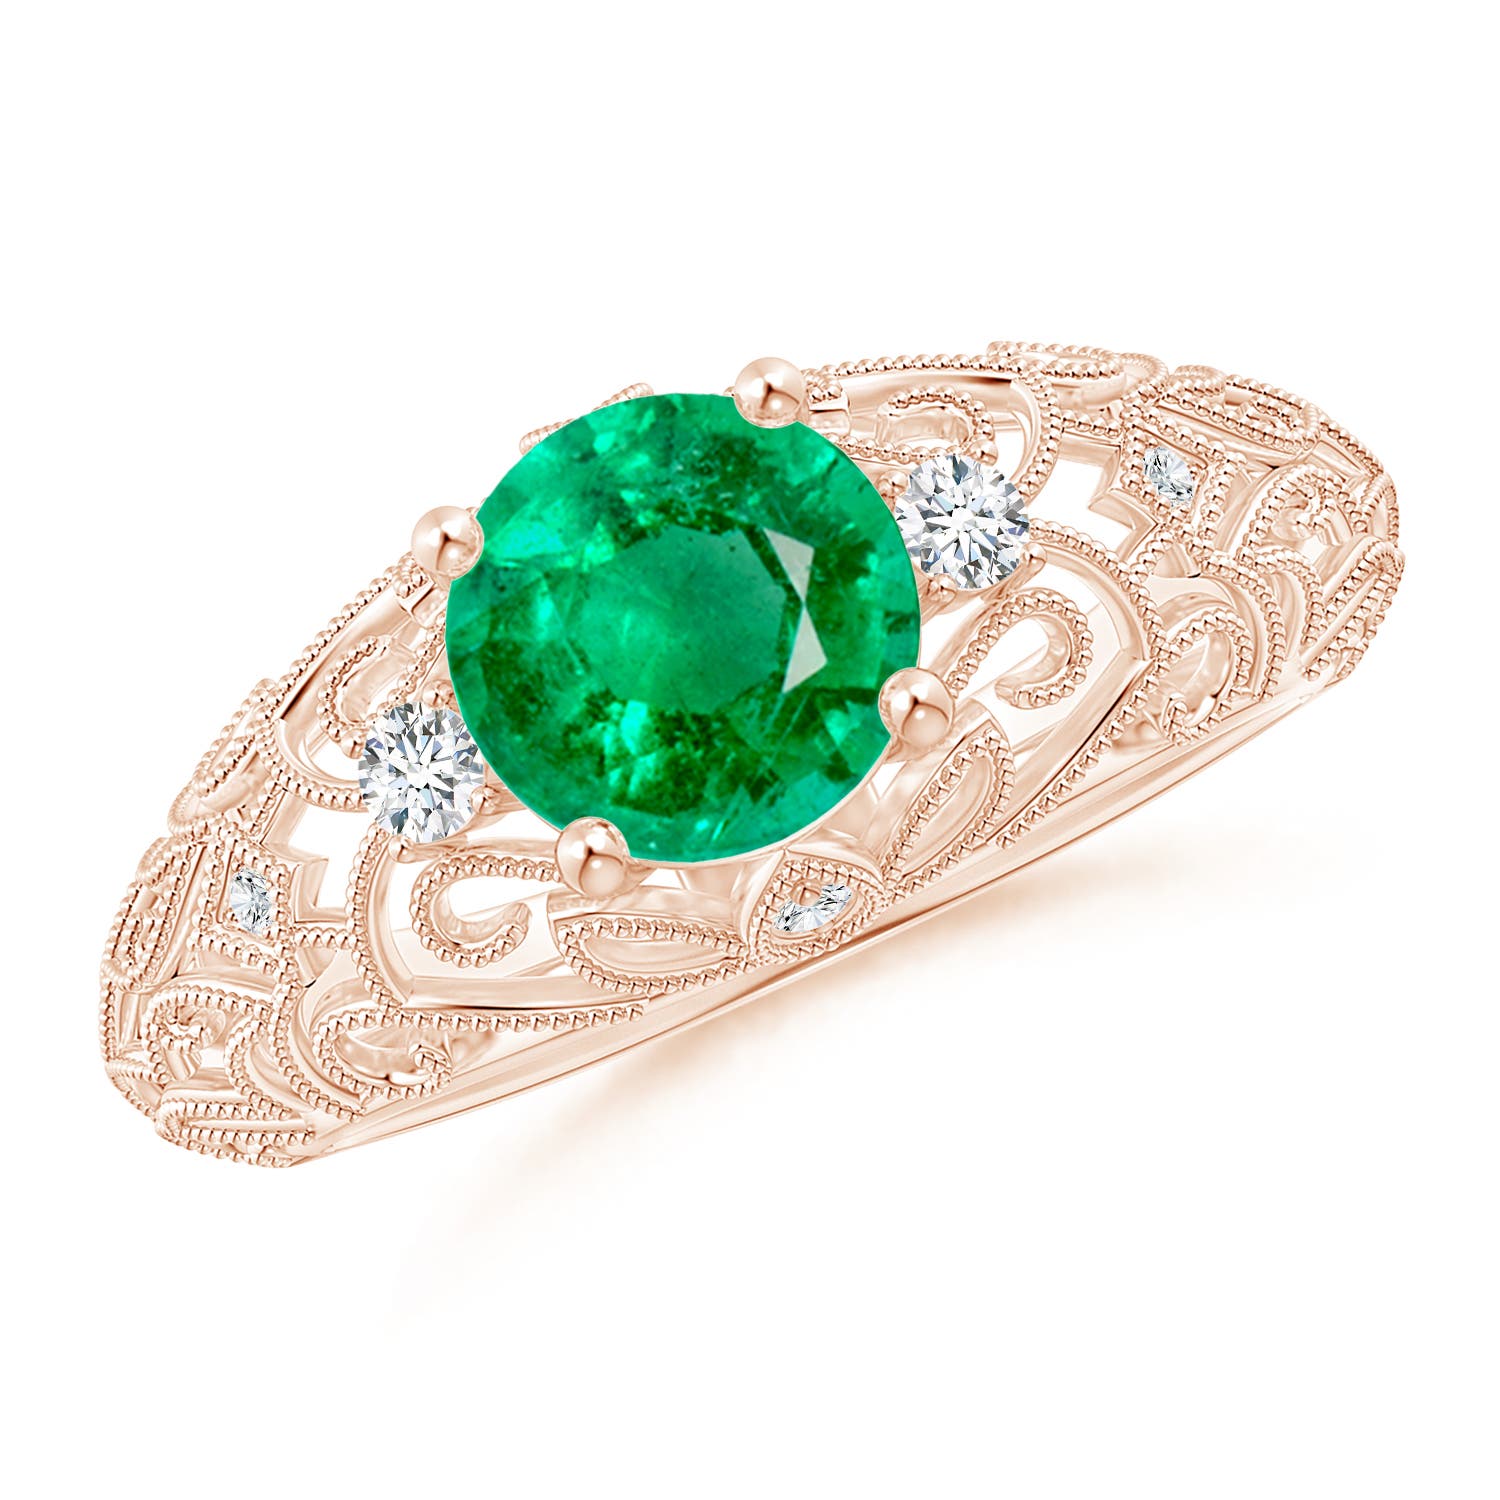 AAA - Emerald / 1.3 CT / 14 KT Rose Gold